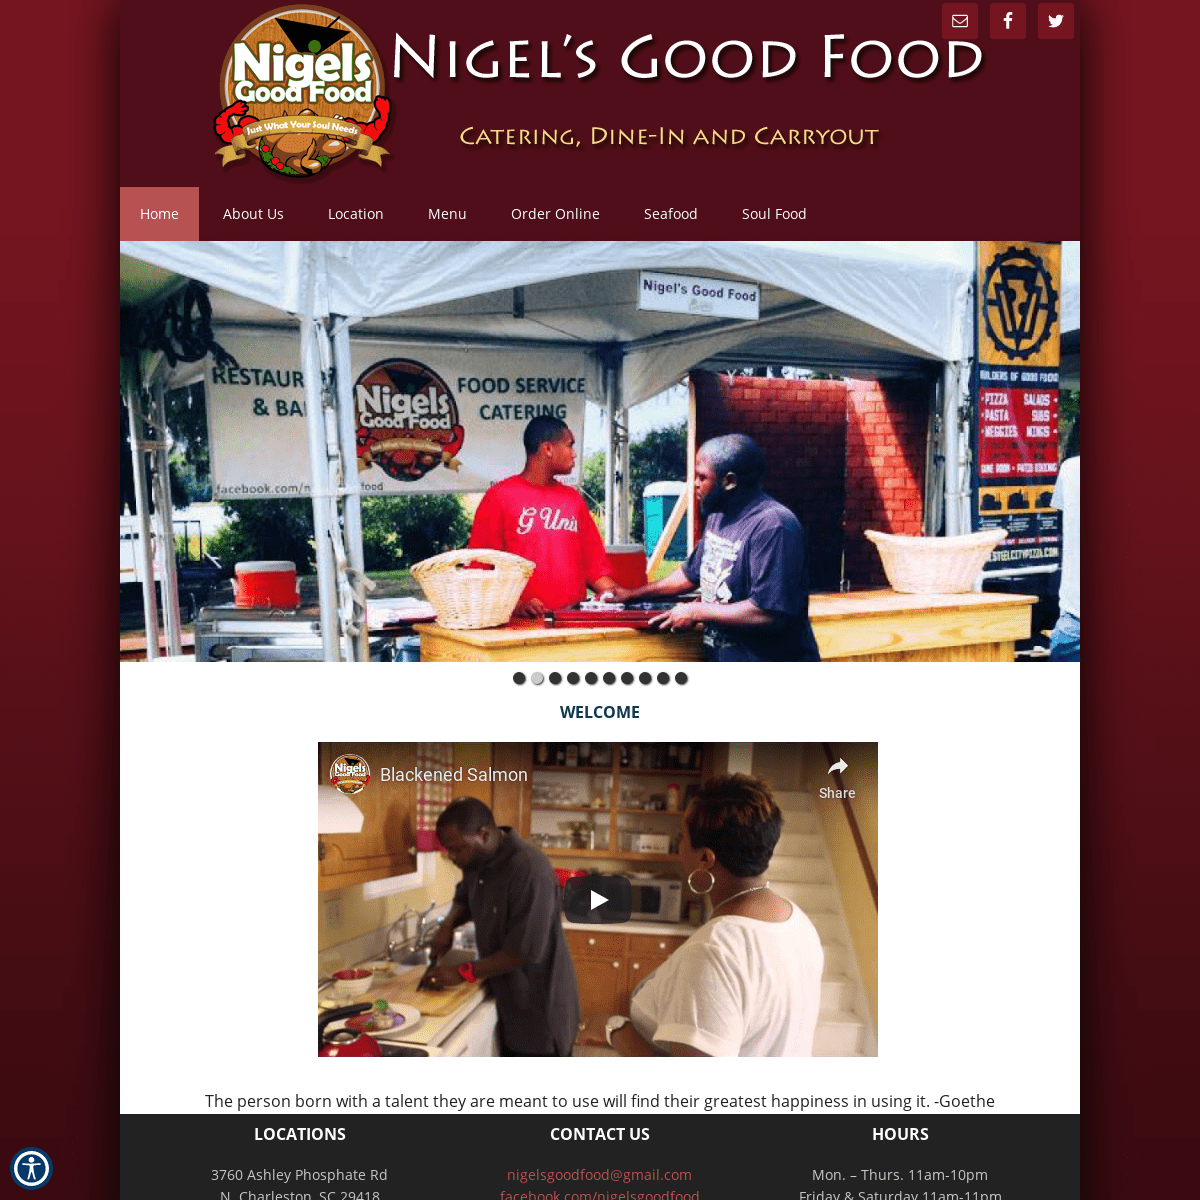 Nigel's Good Food – Just what your soul needs